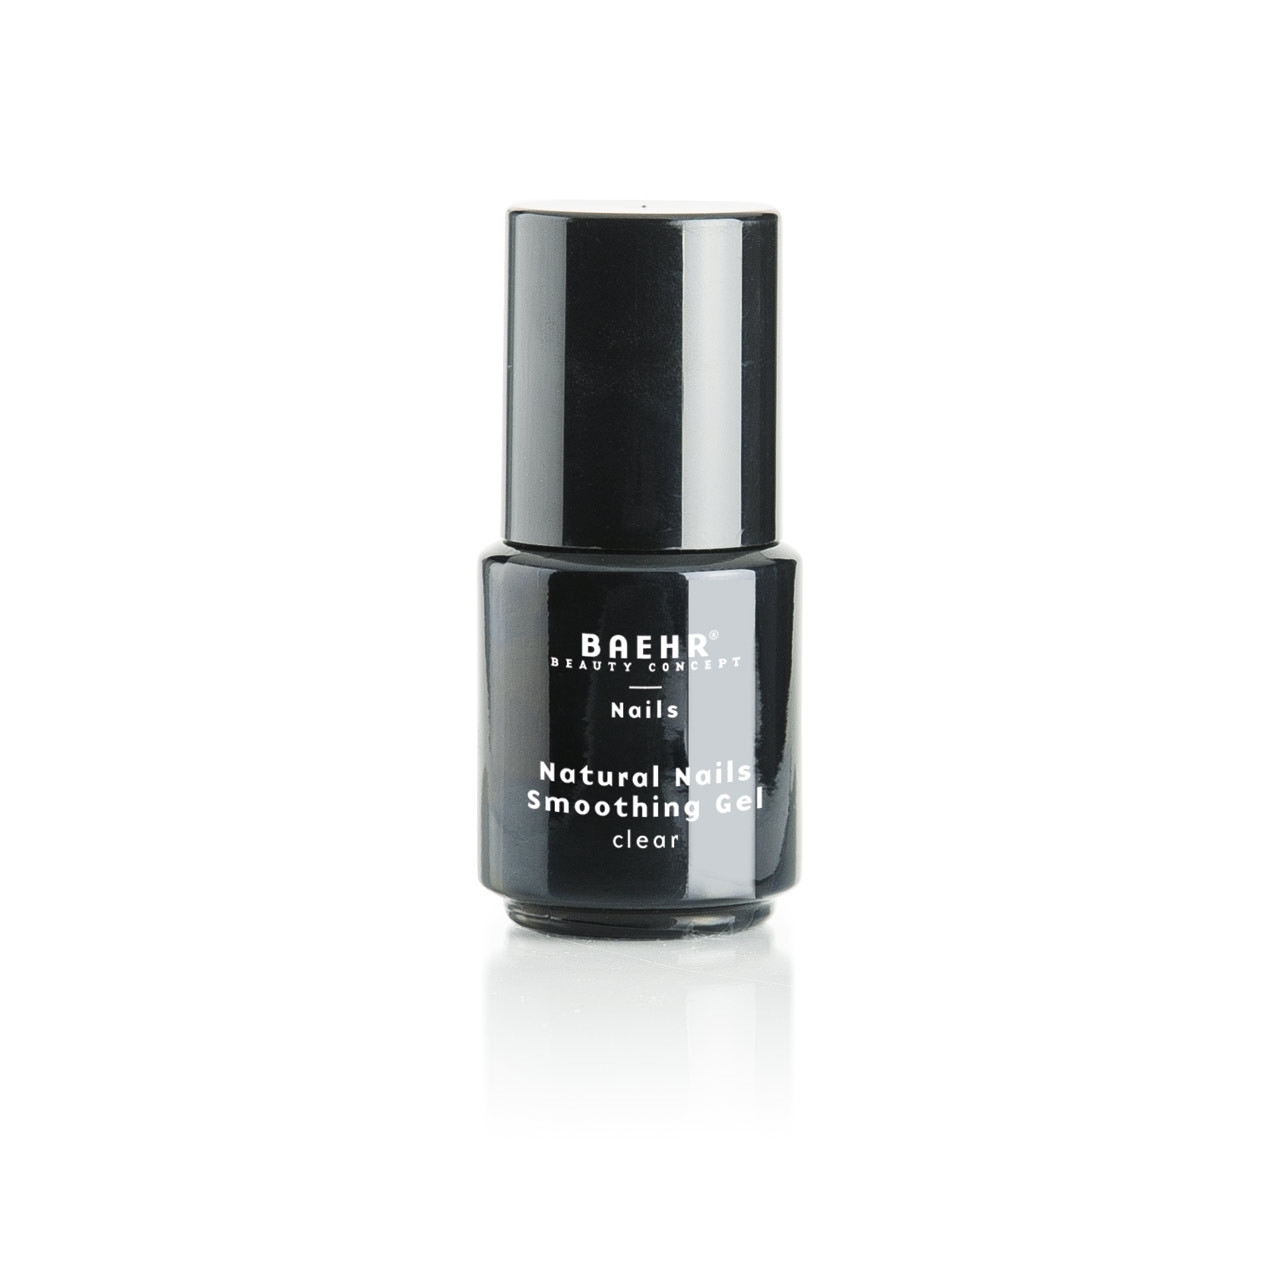 BAEHR BEAUTY CONCEPT - NAILS Natural Nails Smoothing Gel clear 10 ml